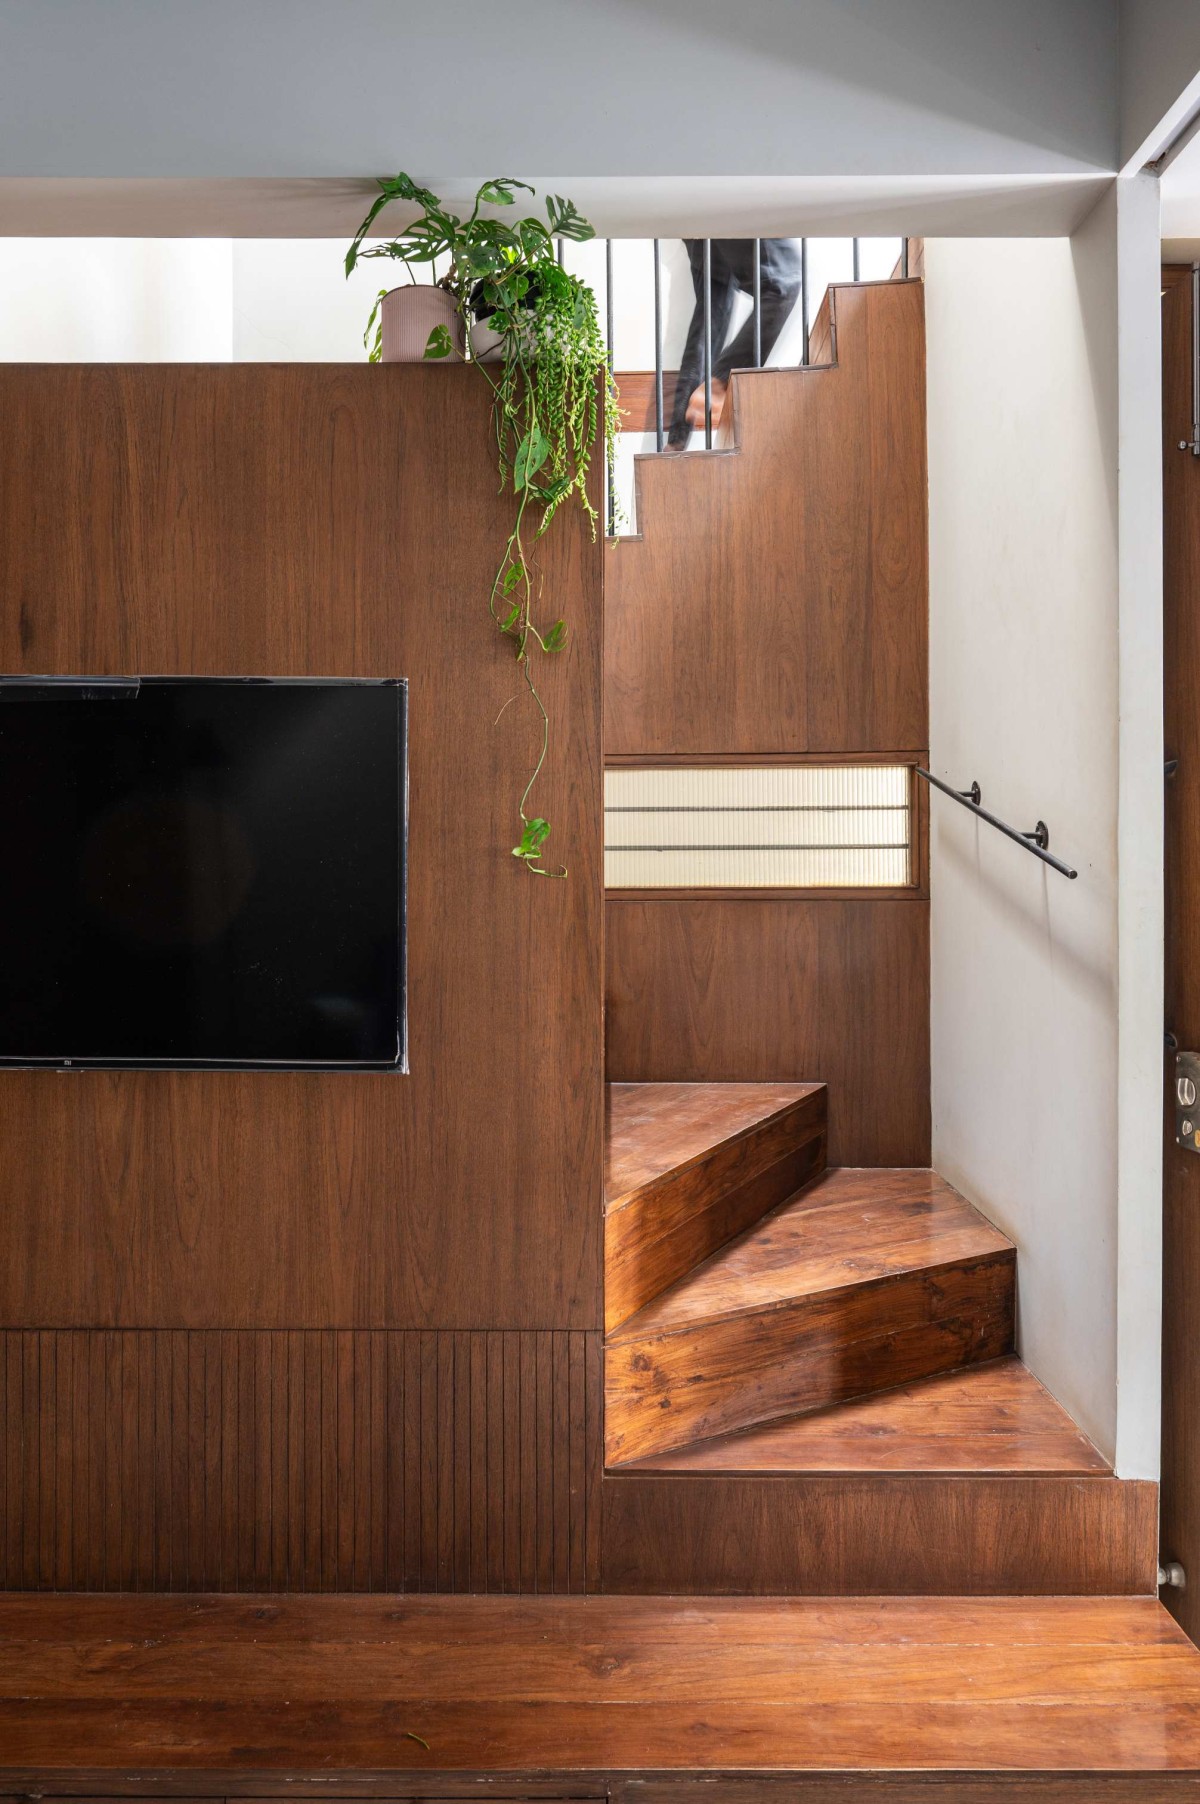 TV Unit of Compact House by Rahul Pudale Design